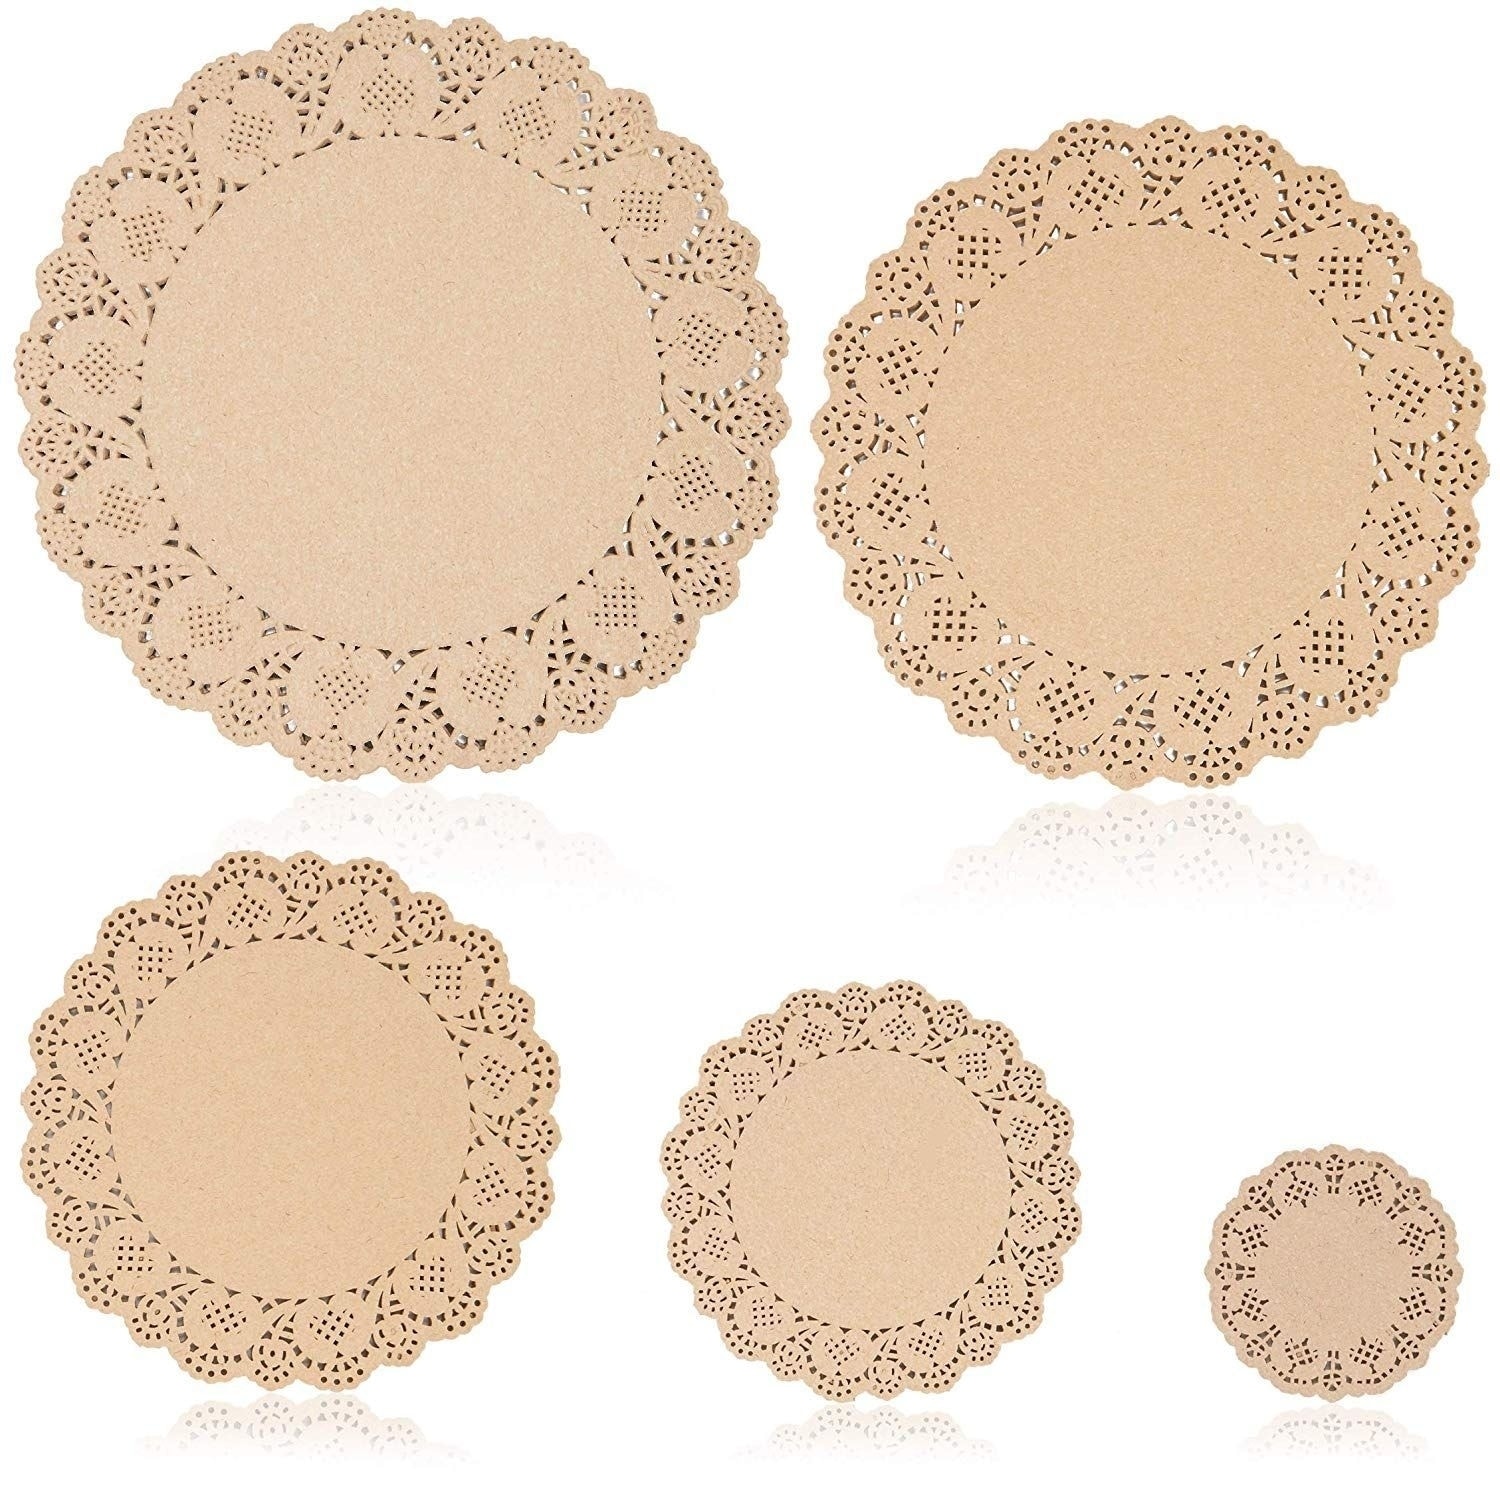 90 Pack Lace Paper Doilies Assorted Sizes White Round Paper Doilies for Food